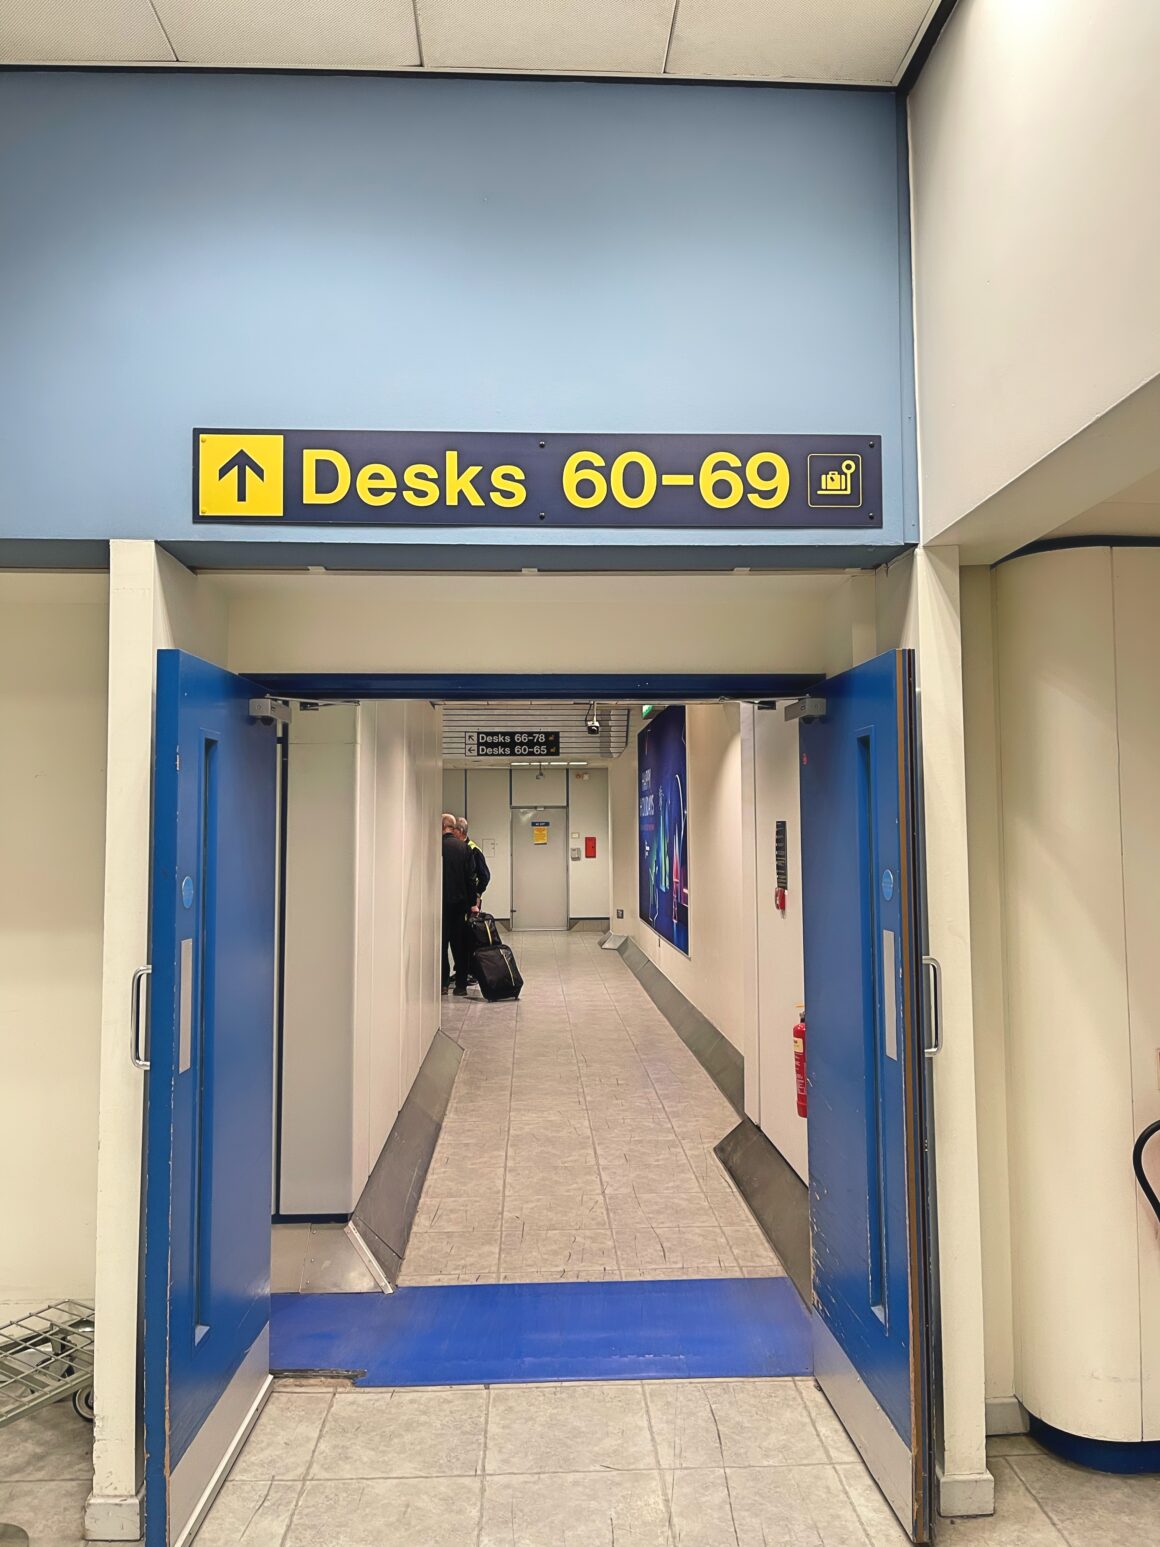 Manchester airport check in Desks 60-69